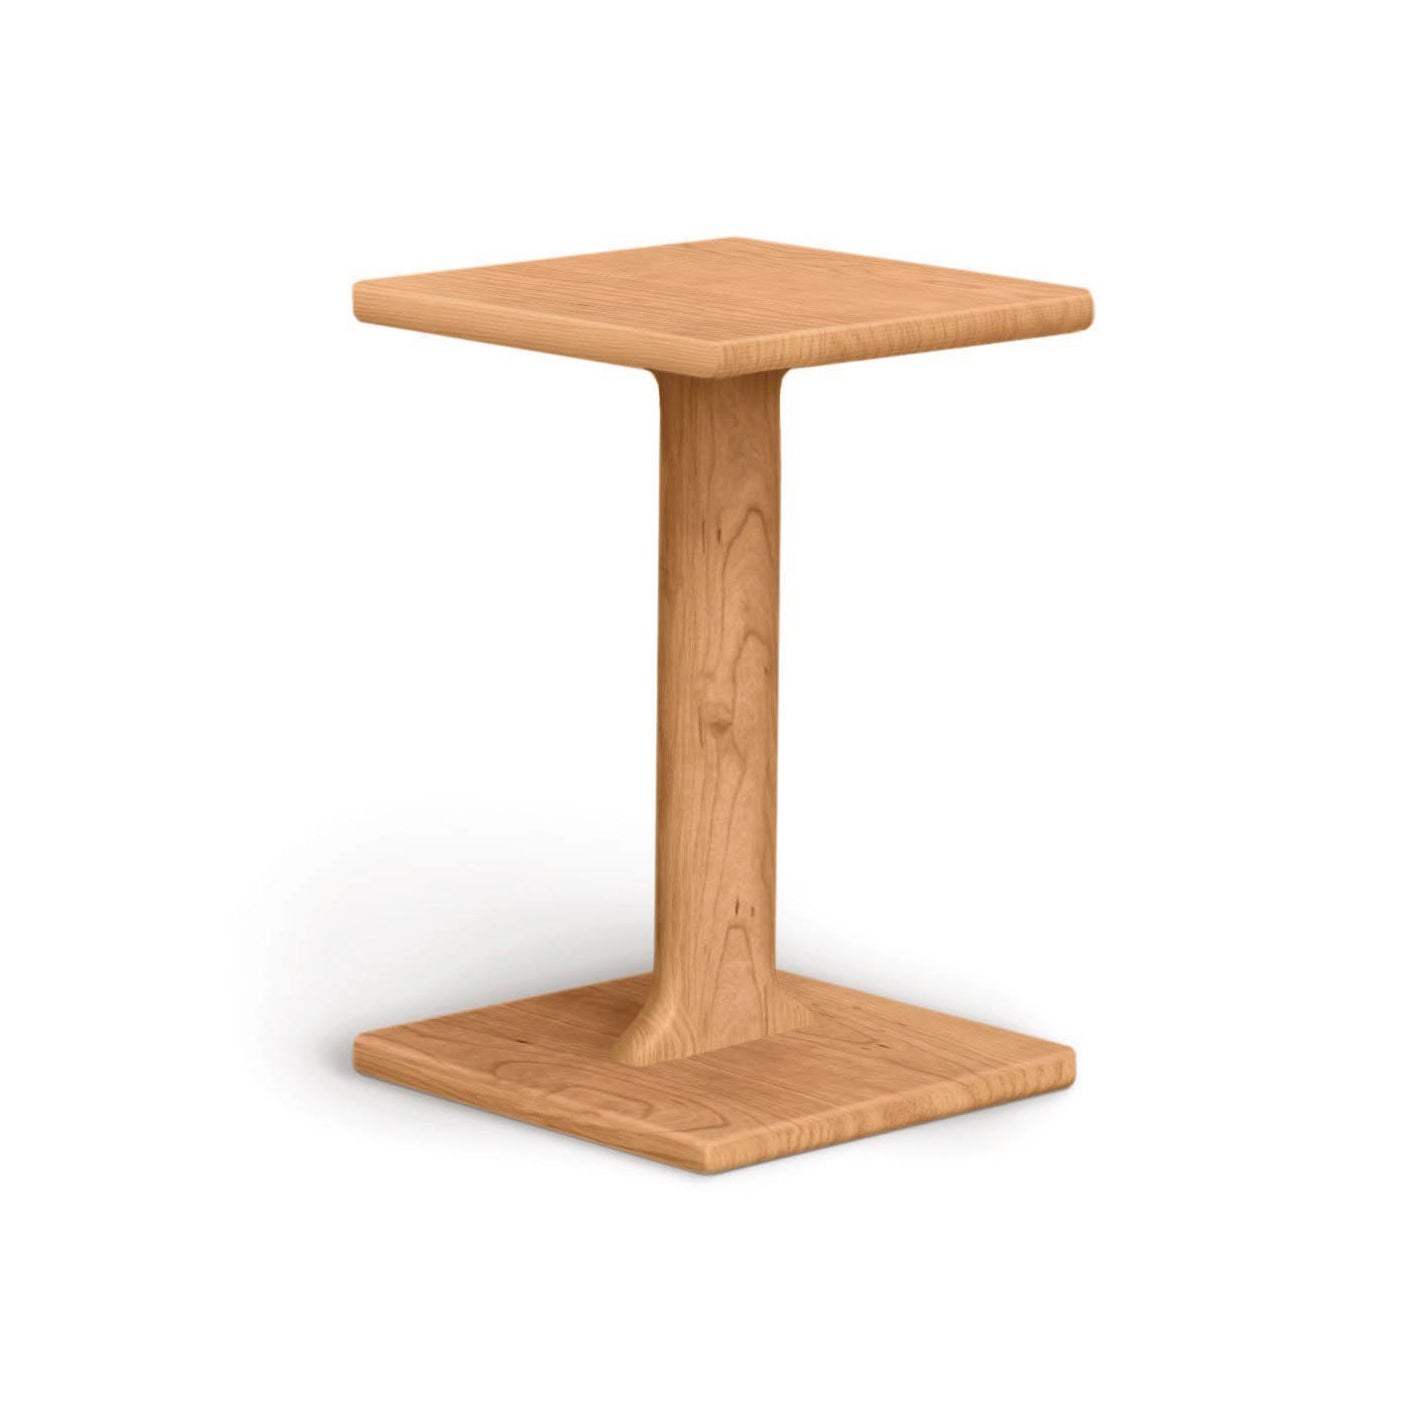 The Copeland Furniture Sierra Chair Table is a stunning example of hardwood construction, featuring a beautifully crafted wooden table set against a clean white background.